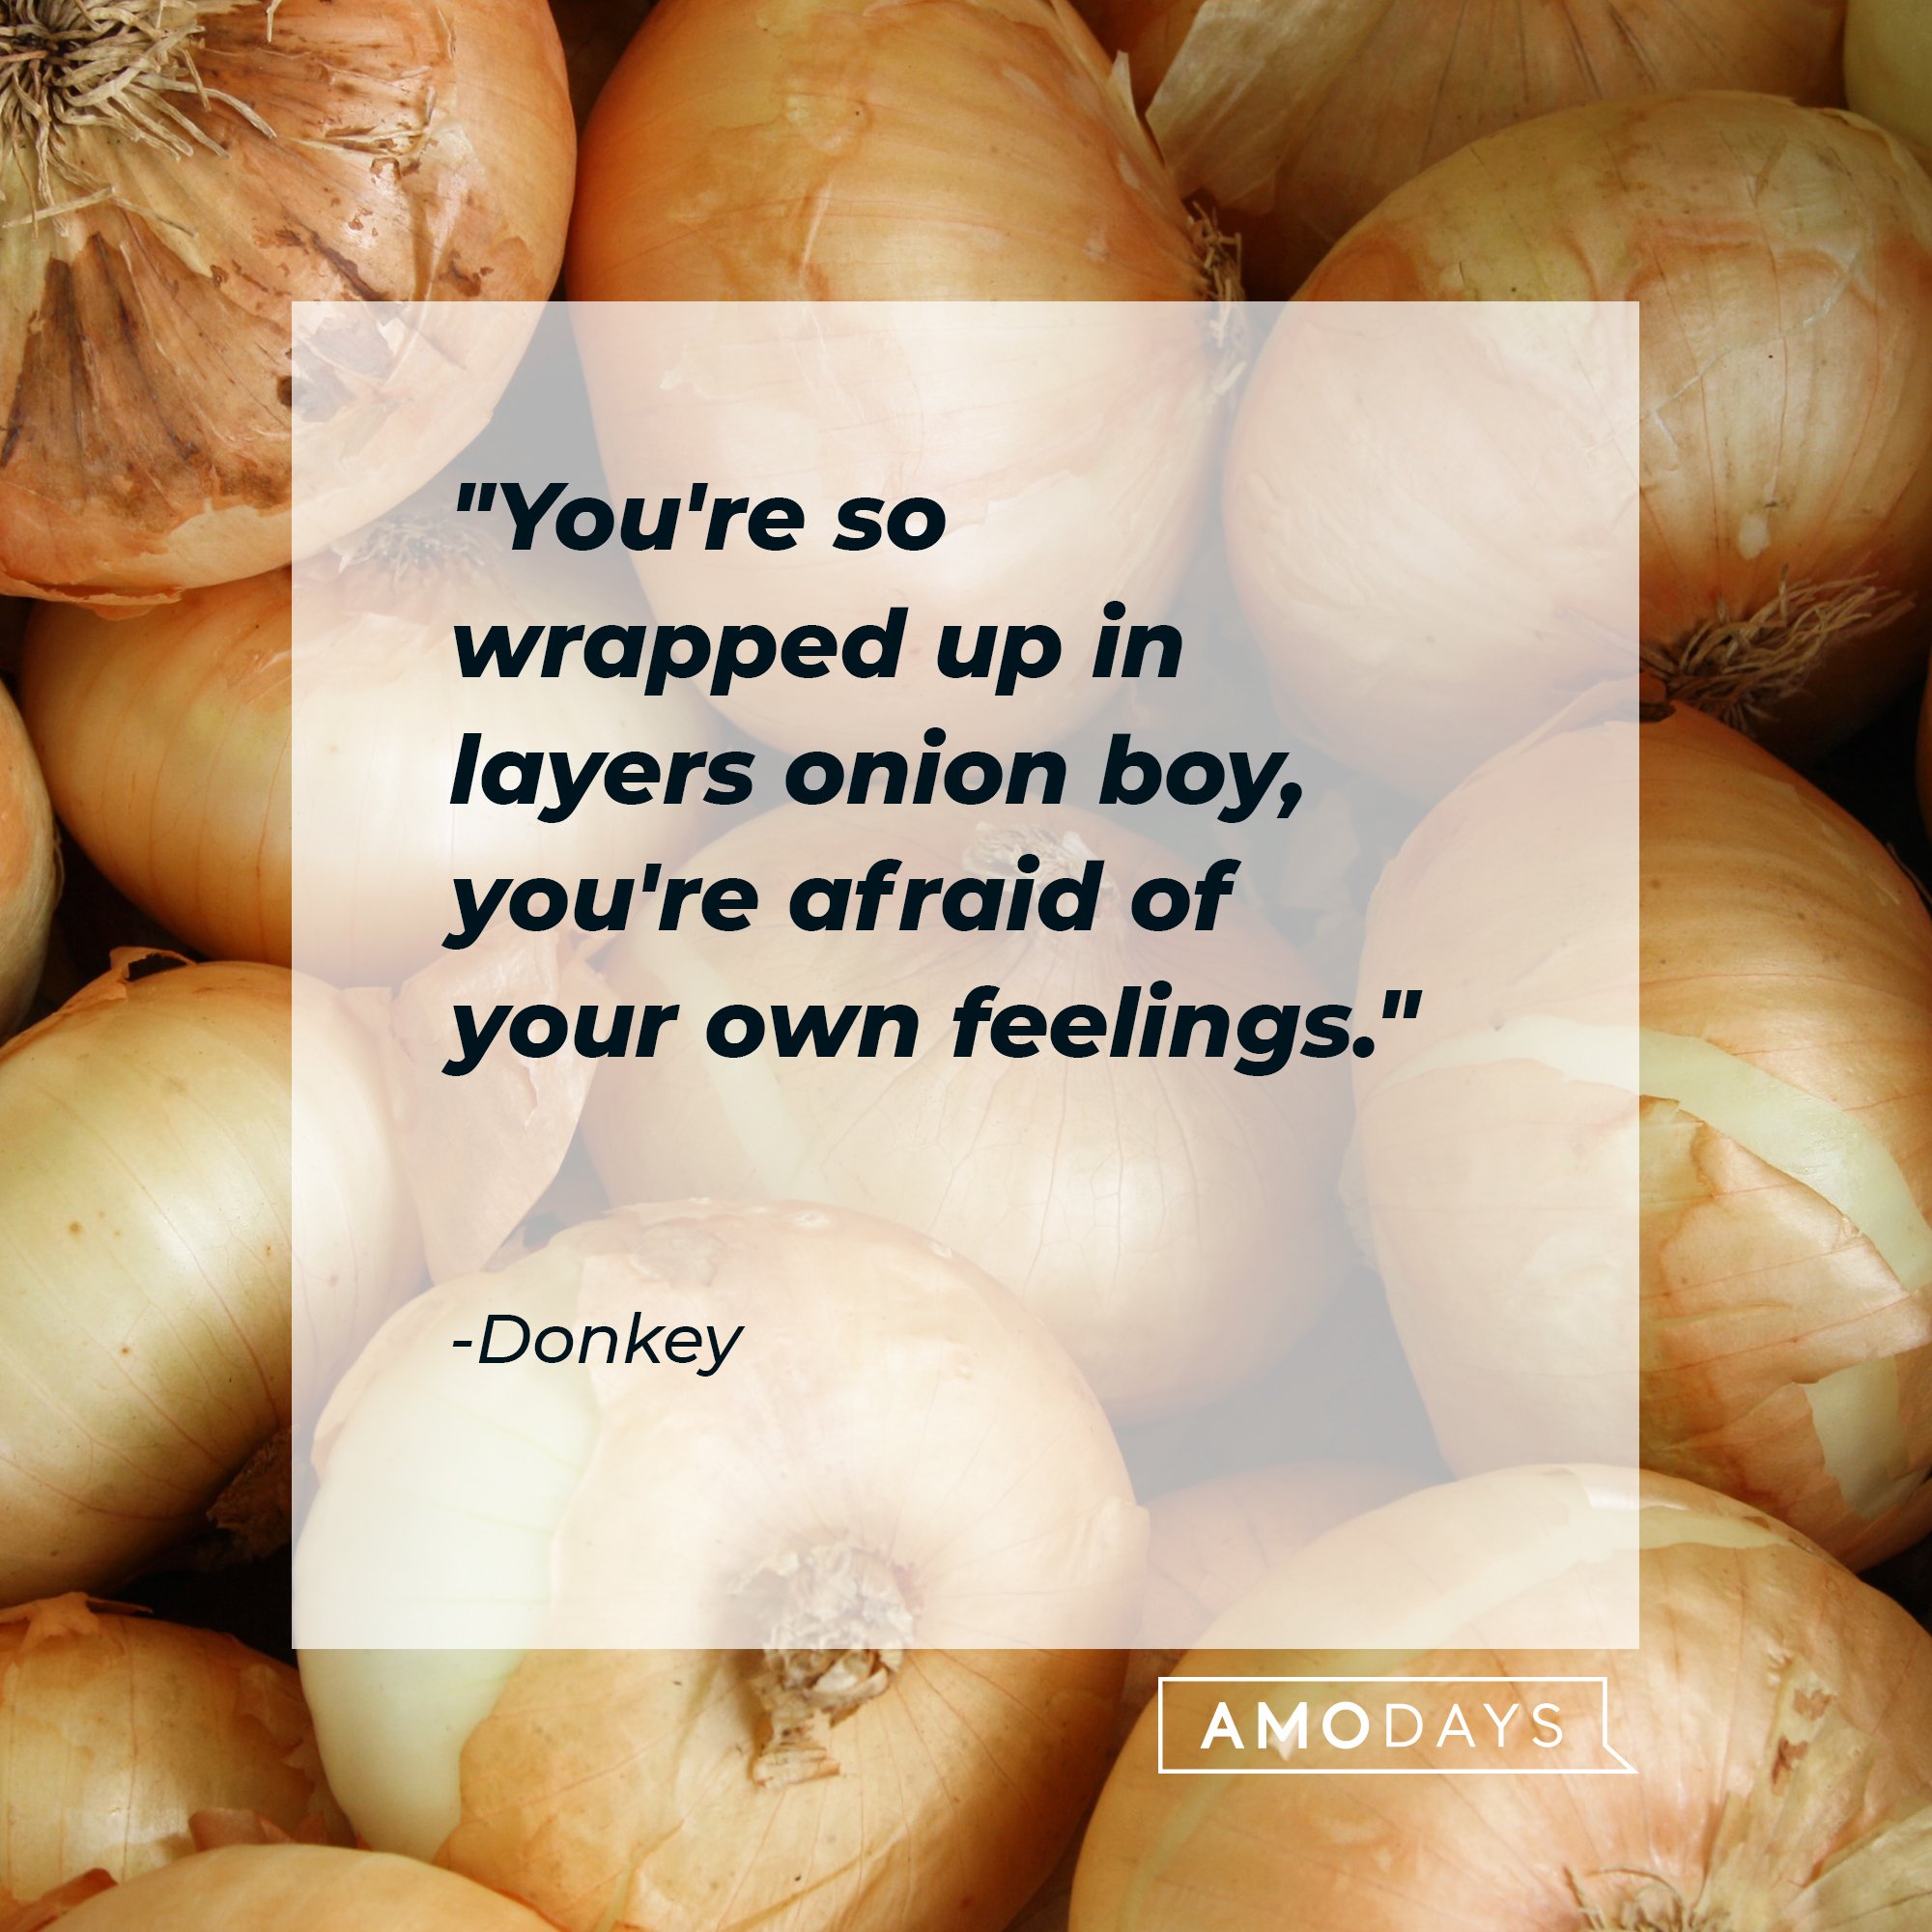  Donkey's quote: "You're so wrapped up in layers onion boy, you're afraid of your own feelings." | Image: AmoDays